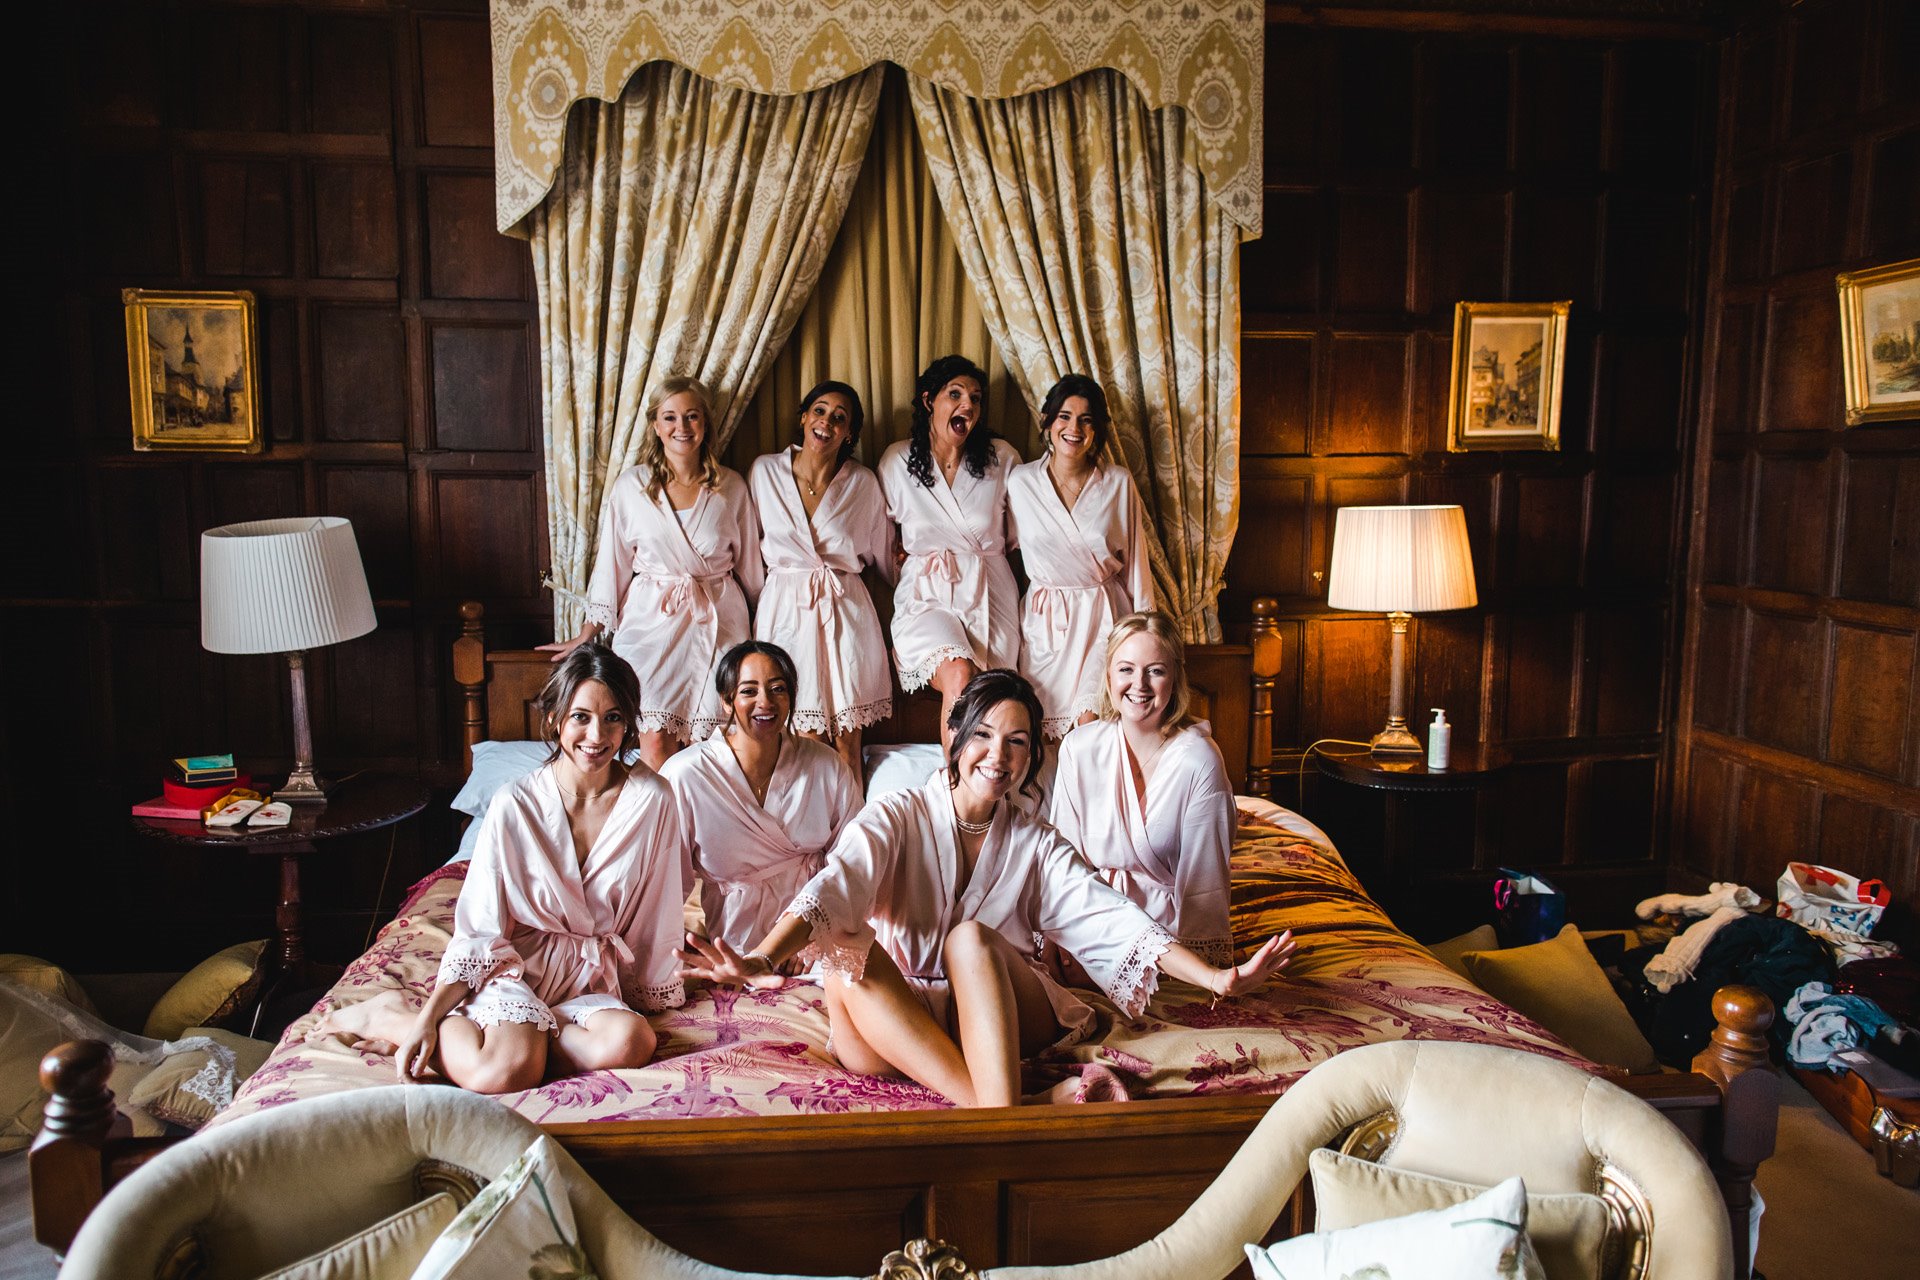 Big Bridal party of seven bridesmaids sit on huge bed in personalised dressing gowns on the morning of day 2 of weekend long wedding